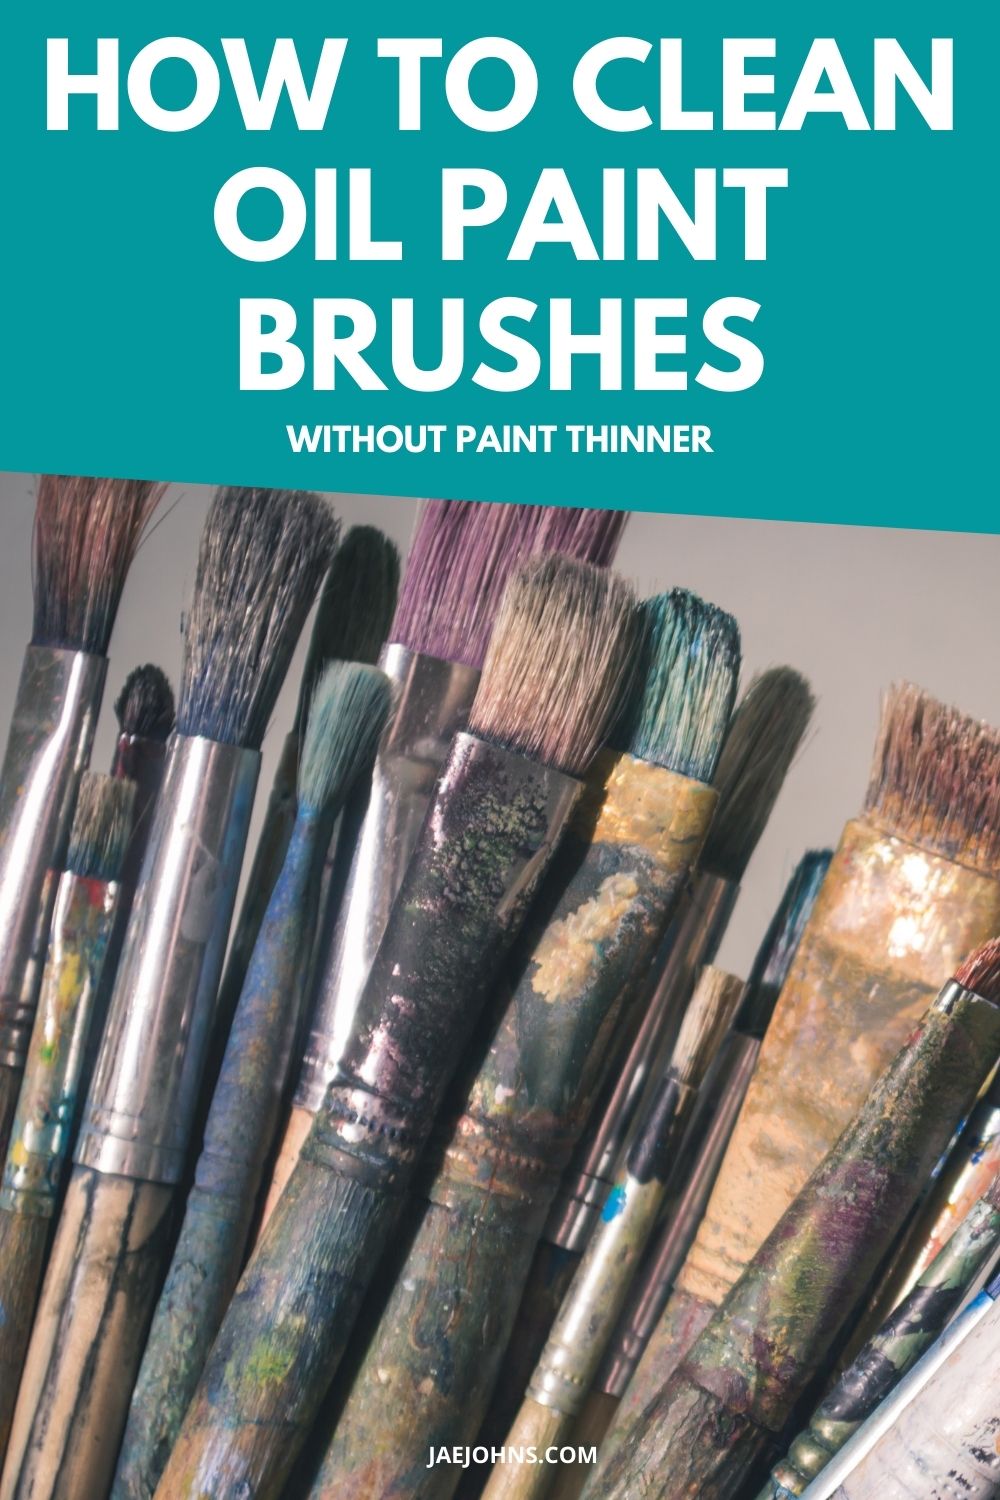 How to Clean Enamel Paint off Brushes 